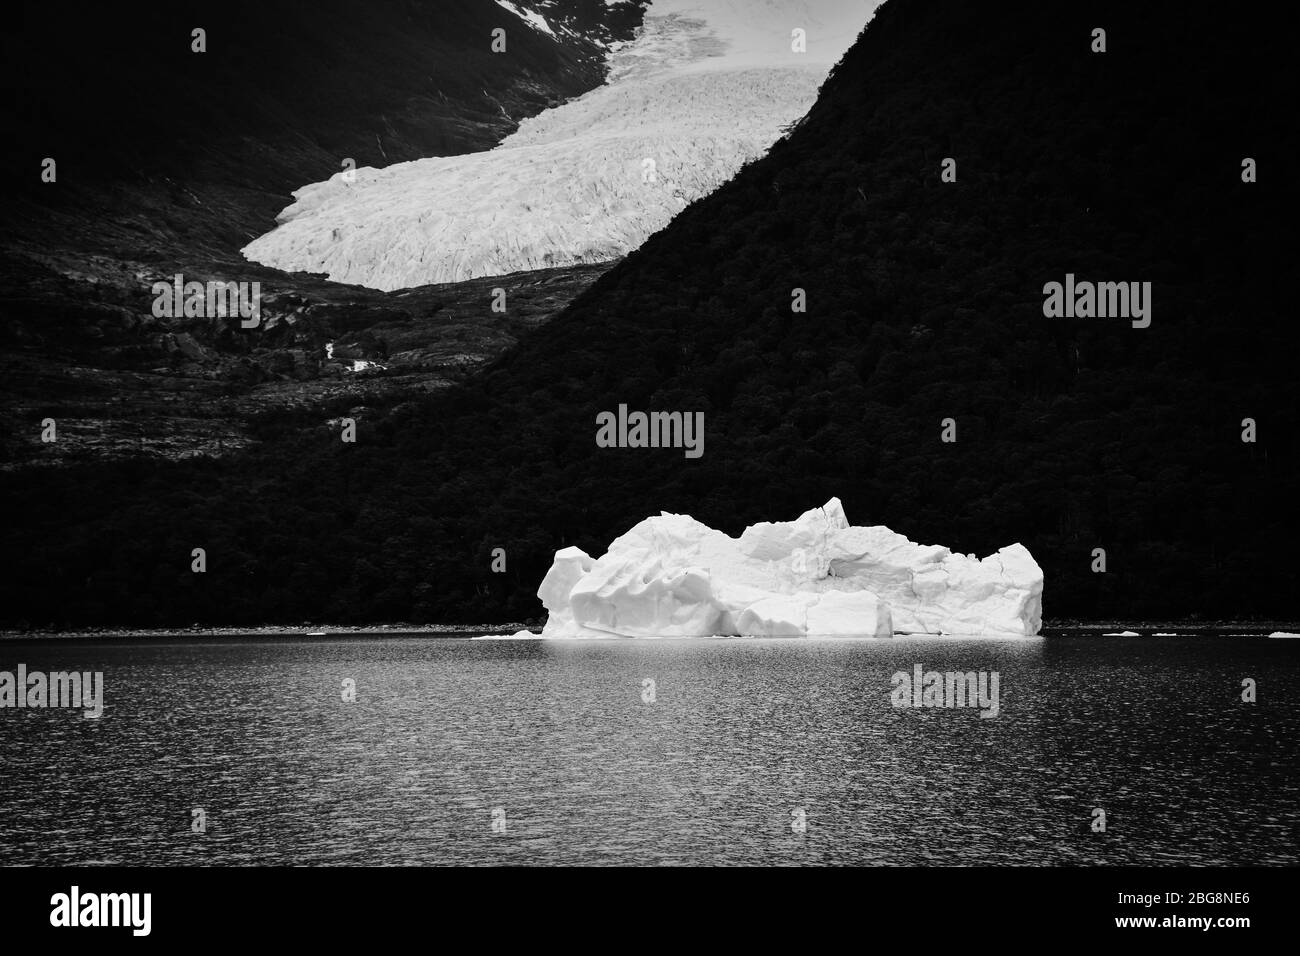 iceberg and glacier tongue with rain forest at Lago Argentino, patagonia, Argentina. Monochrome Stock Photo